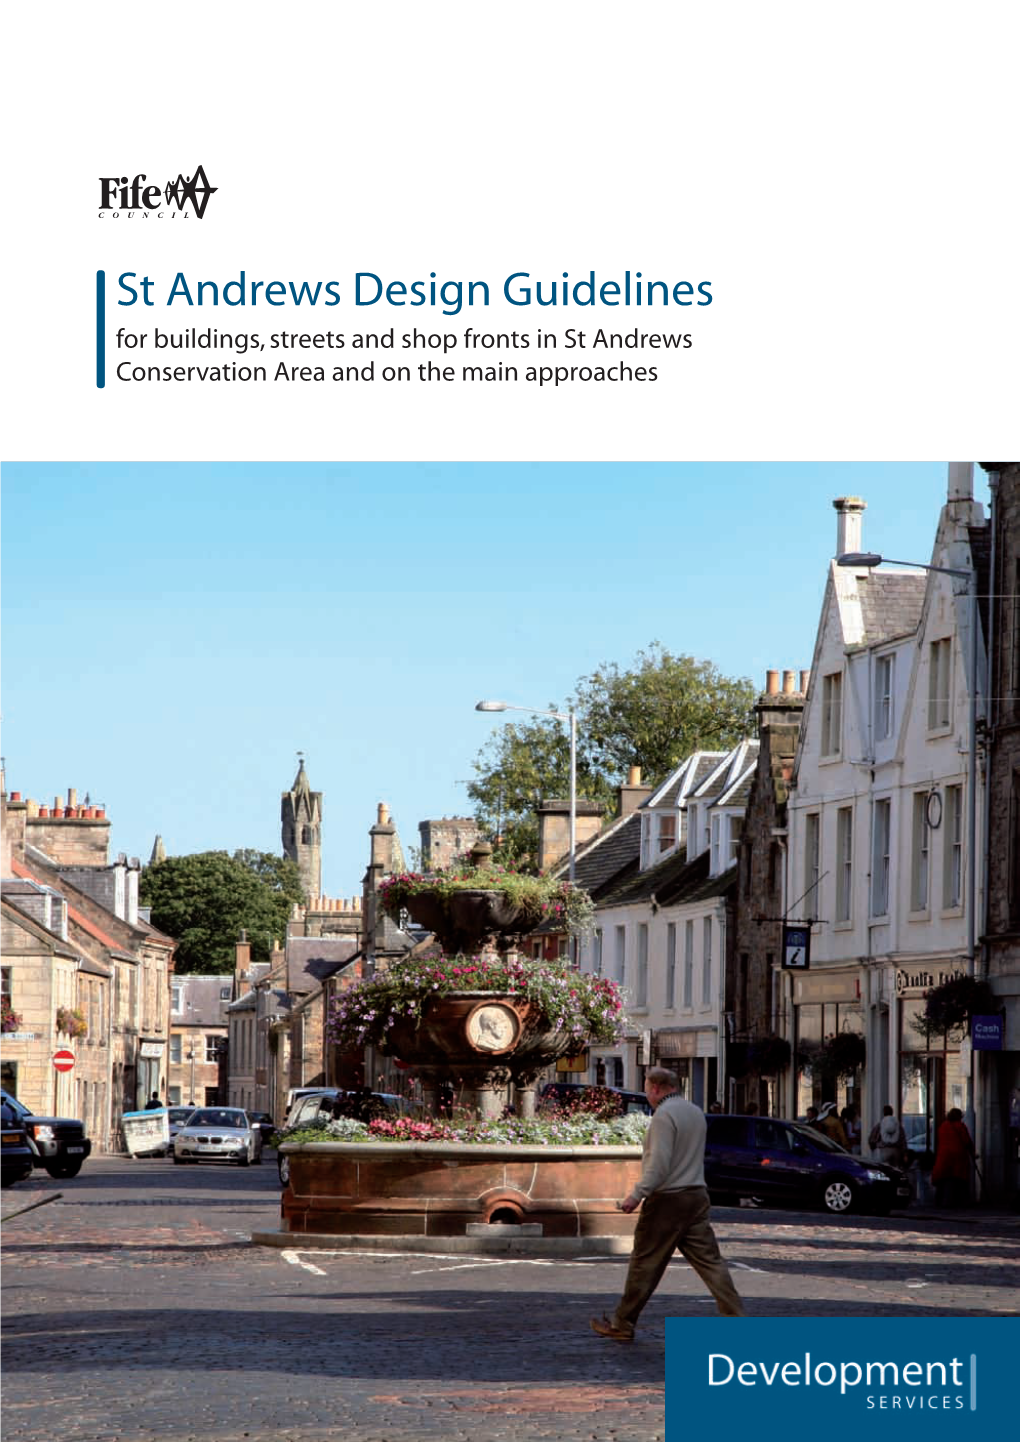 St Andrews Design Guidelines for Buildings, Streets and Shop Fronts in St Andrews Conservation Area and on the Main Approaches